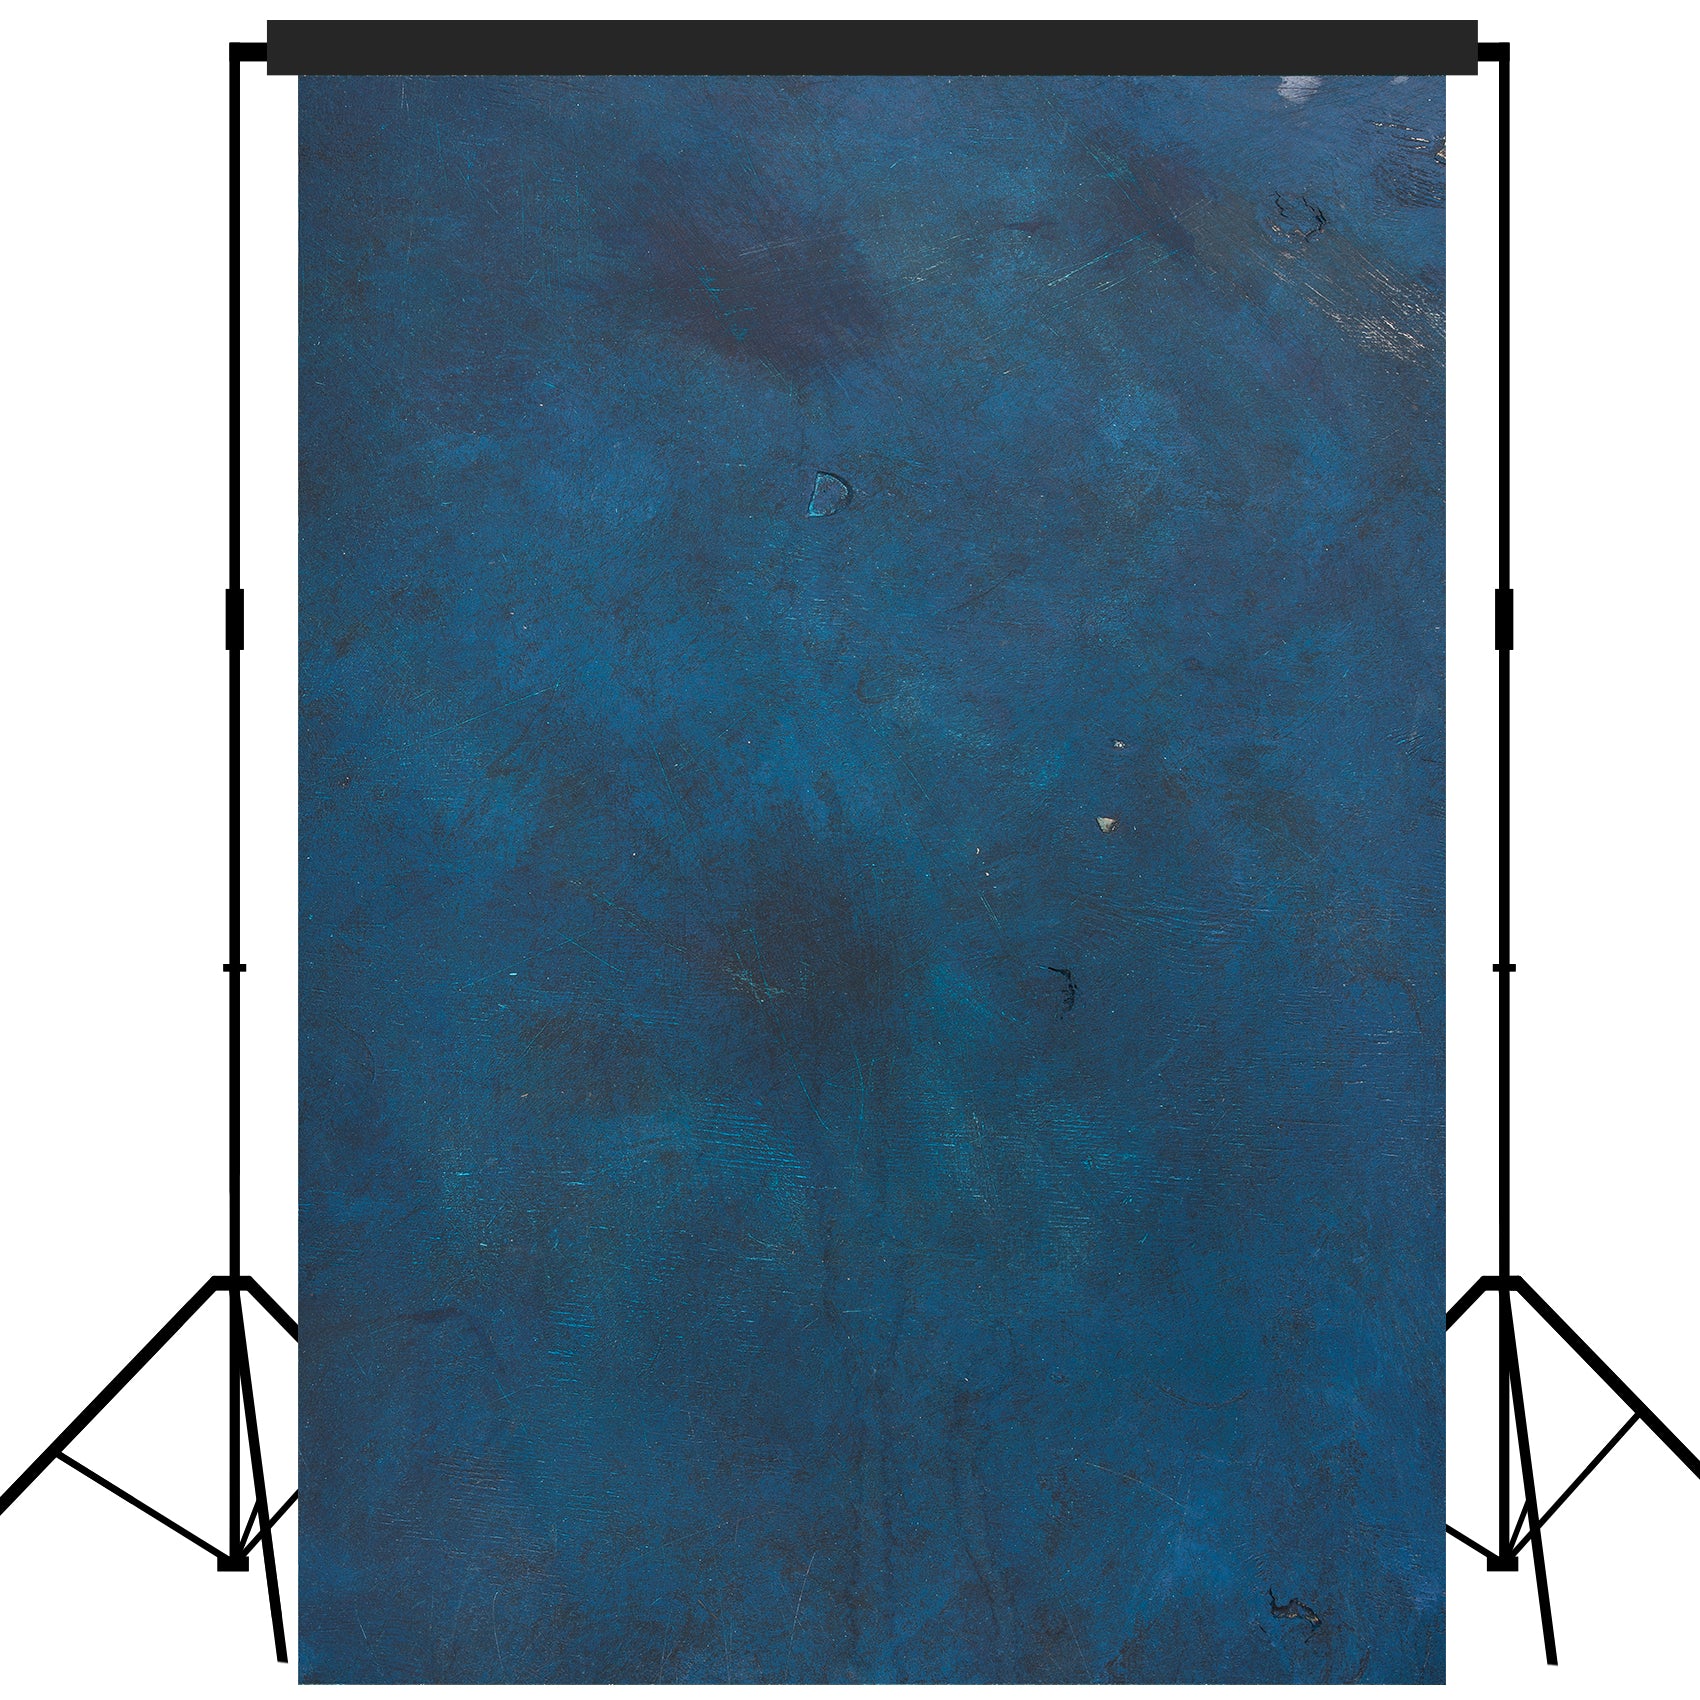 Rustic Distressed Backdrop Photography Background Party 7x5feet #1804